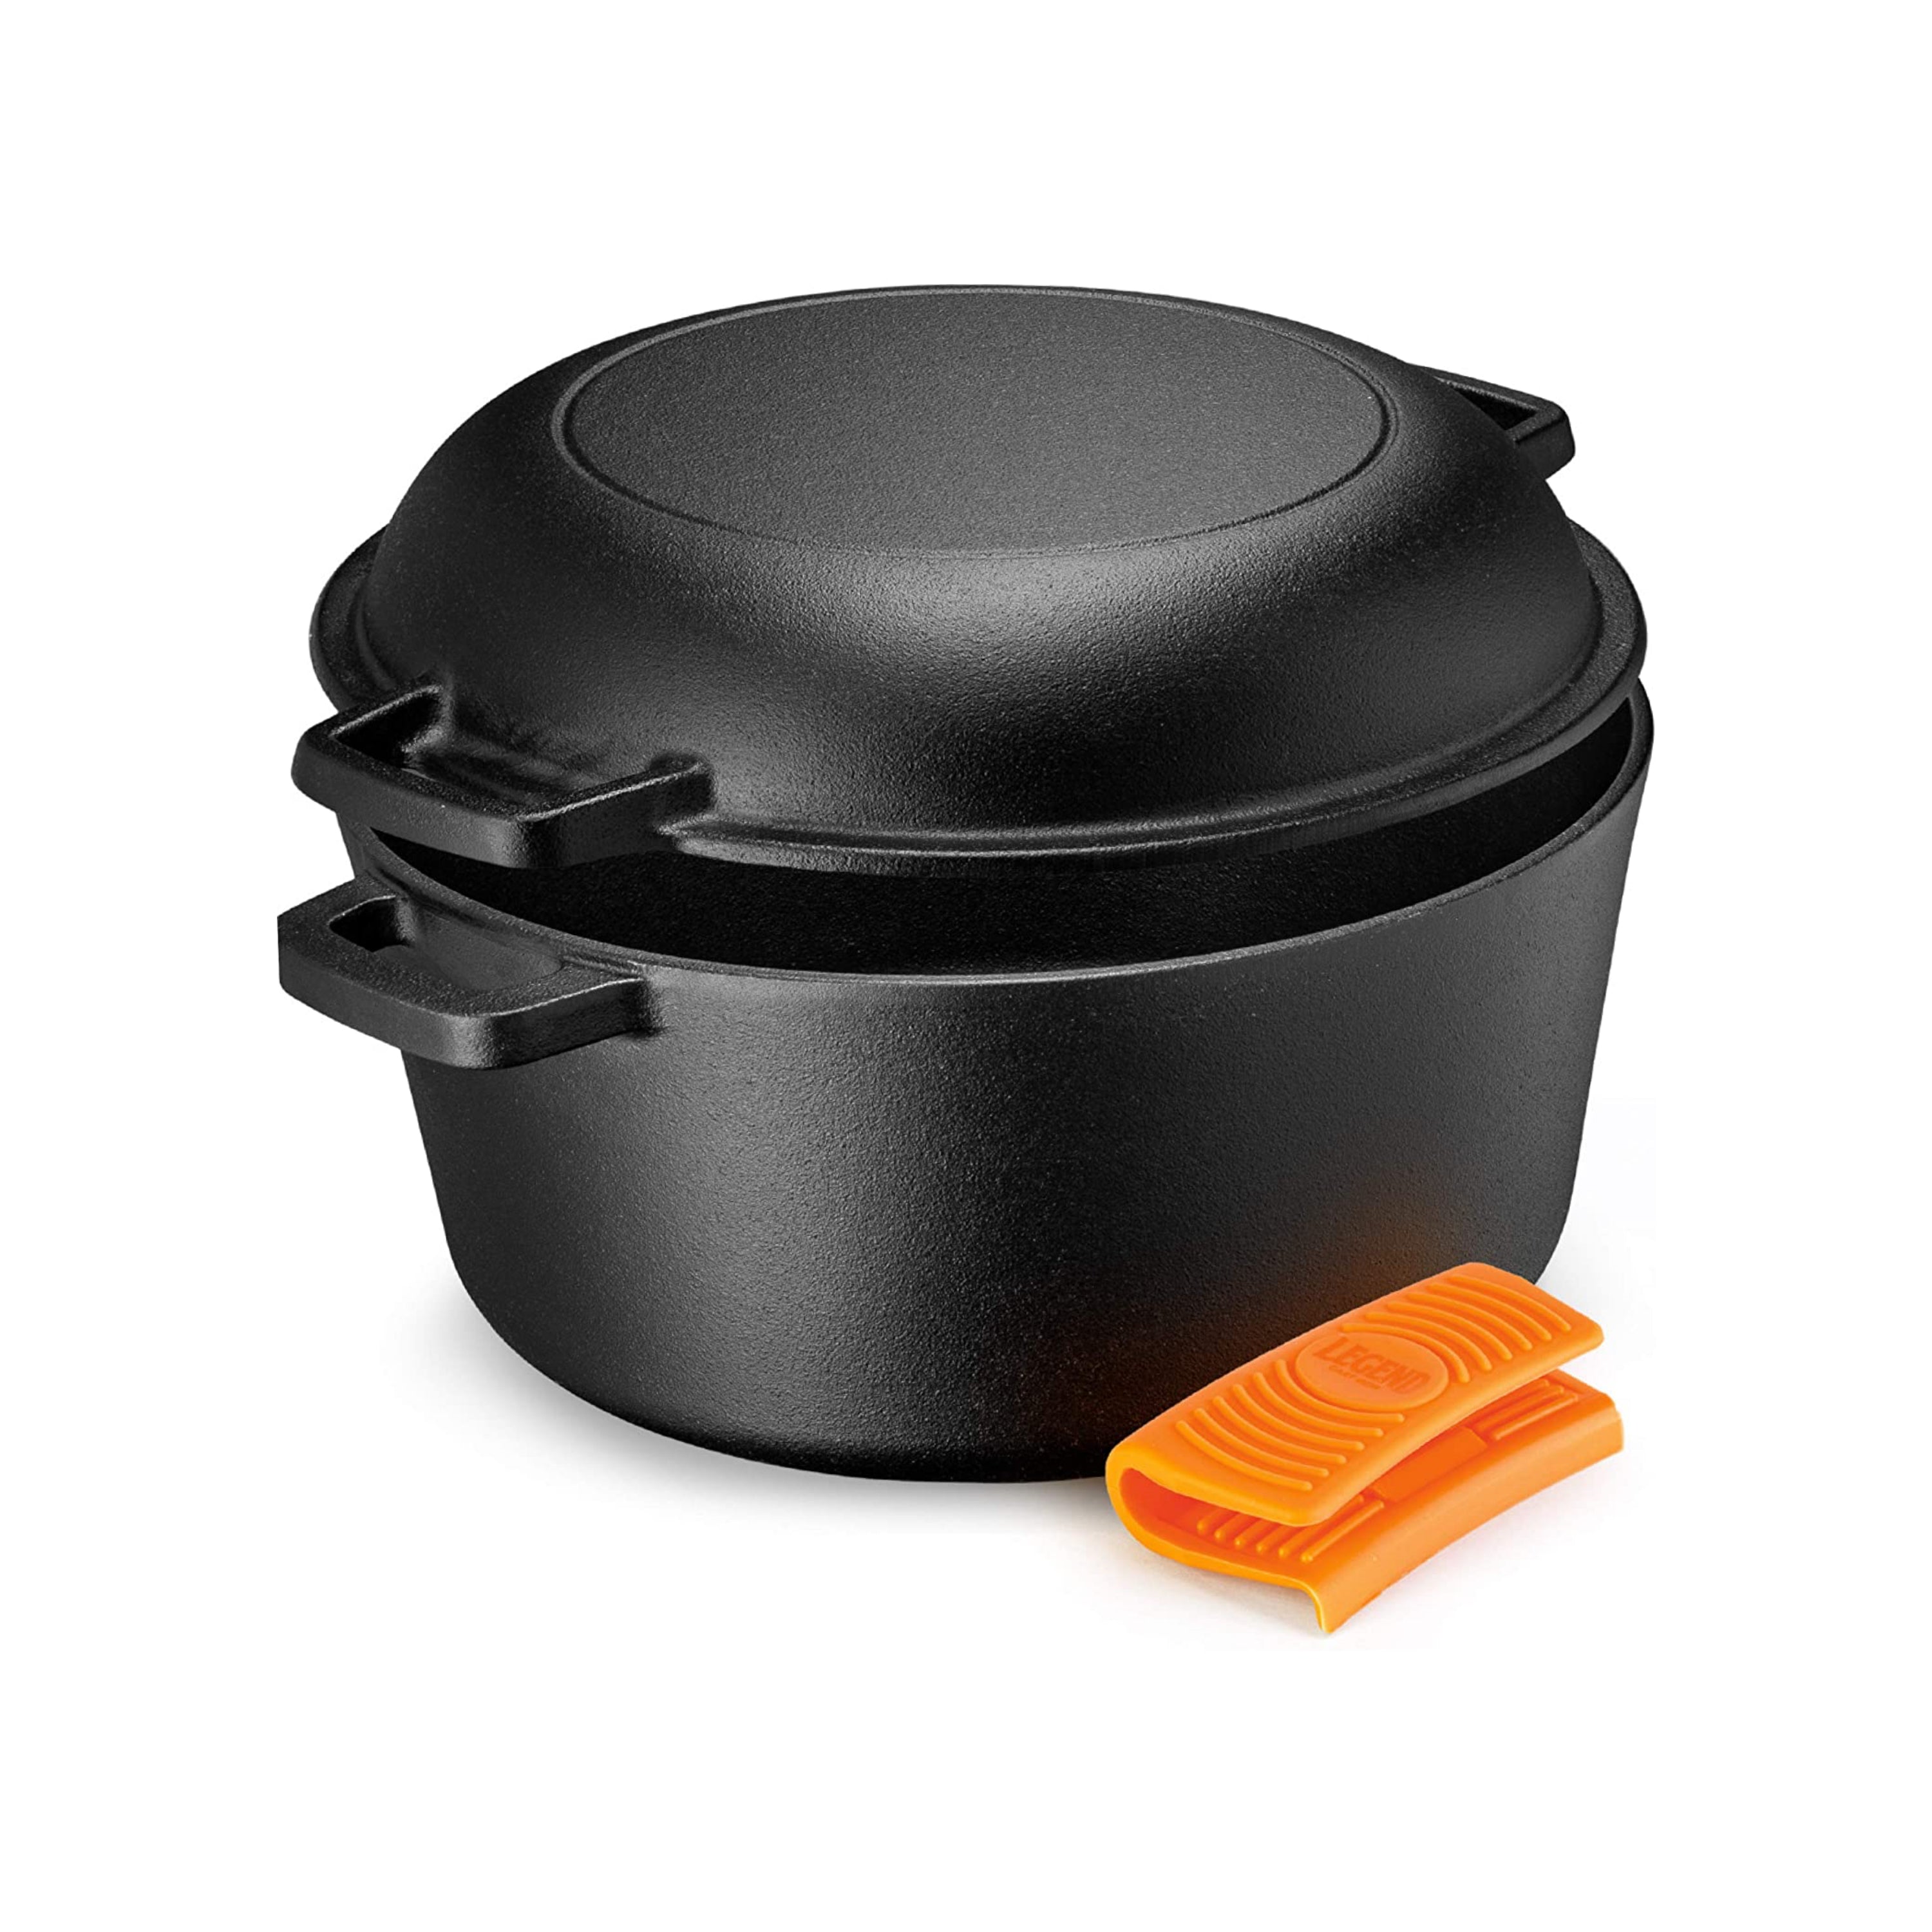 LEGEND COOKWARE Legend cookware cast Iron Dutch Oven 7qt Heavy-Duty Stock  Pot for Frying, cooking, Baking & Broiling on Induction, Electric, ga